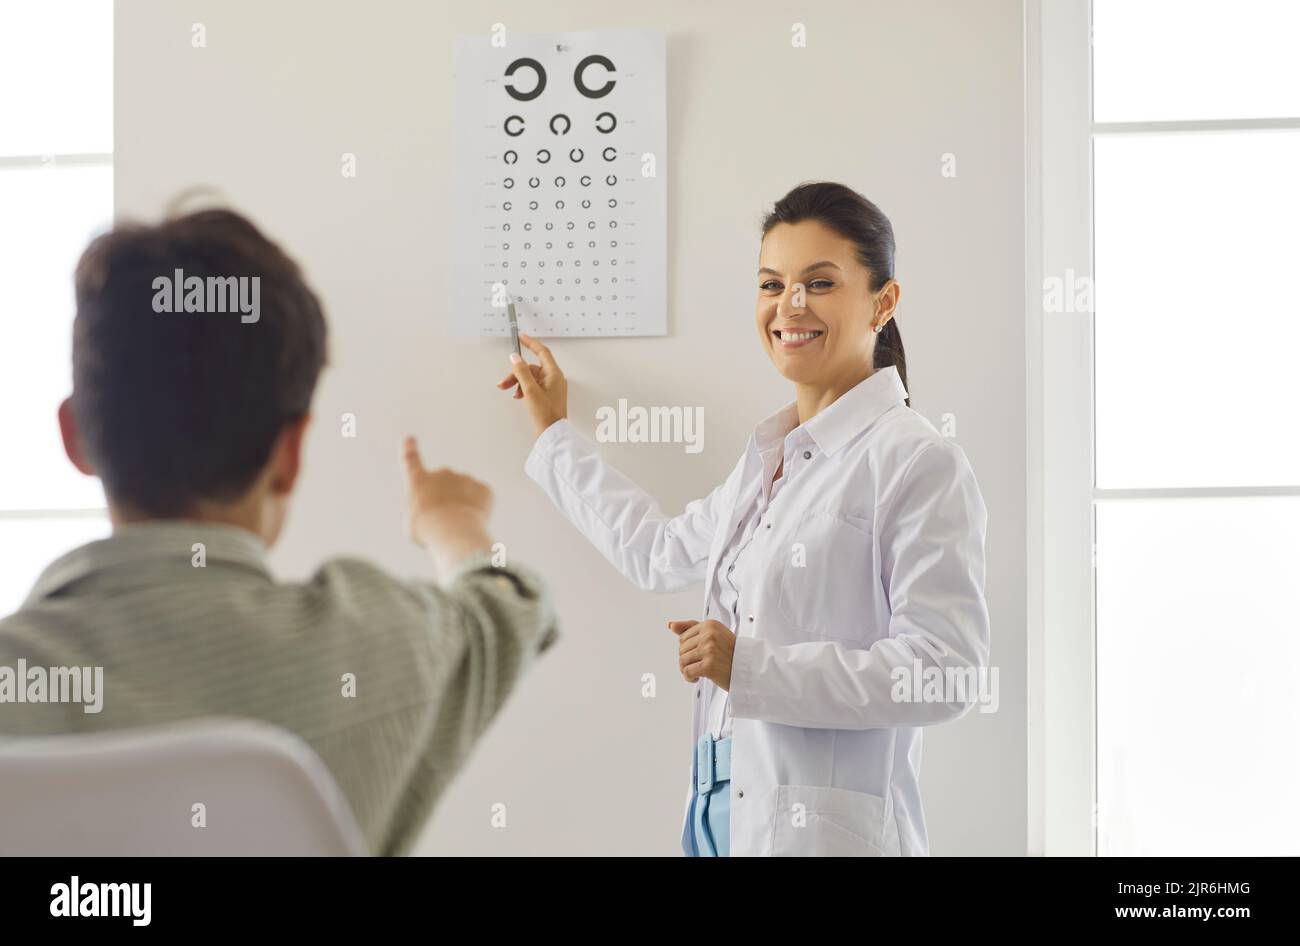 Friendly optometrist is checking boy's vision in ophthalmology office with help of test chart. Stock Photo